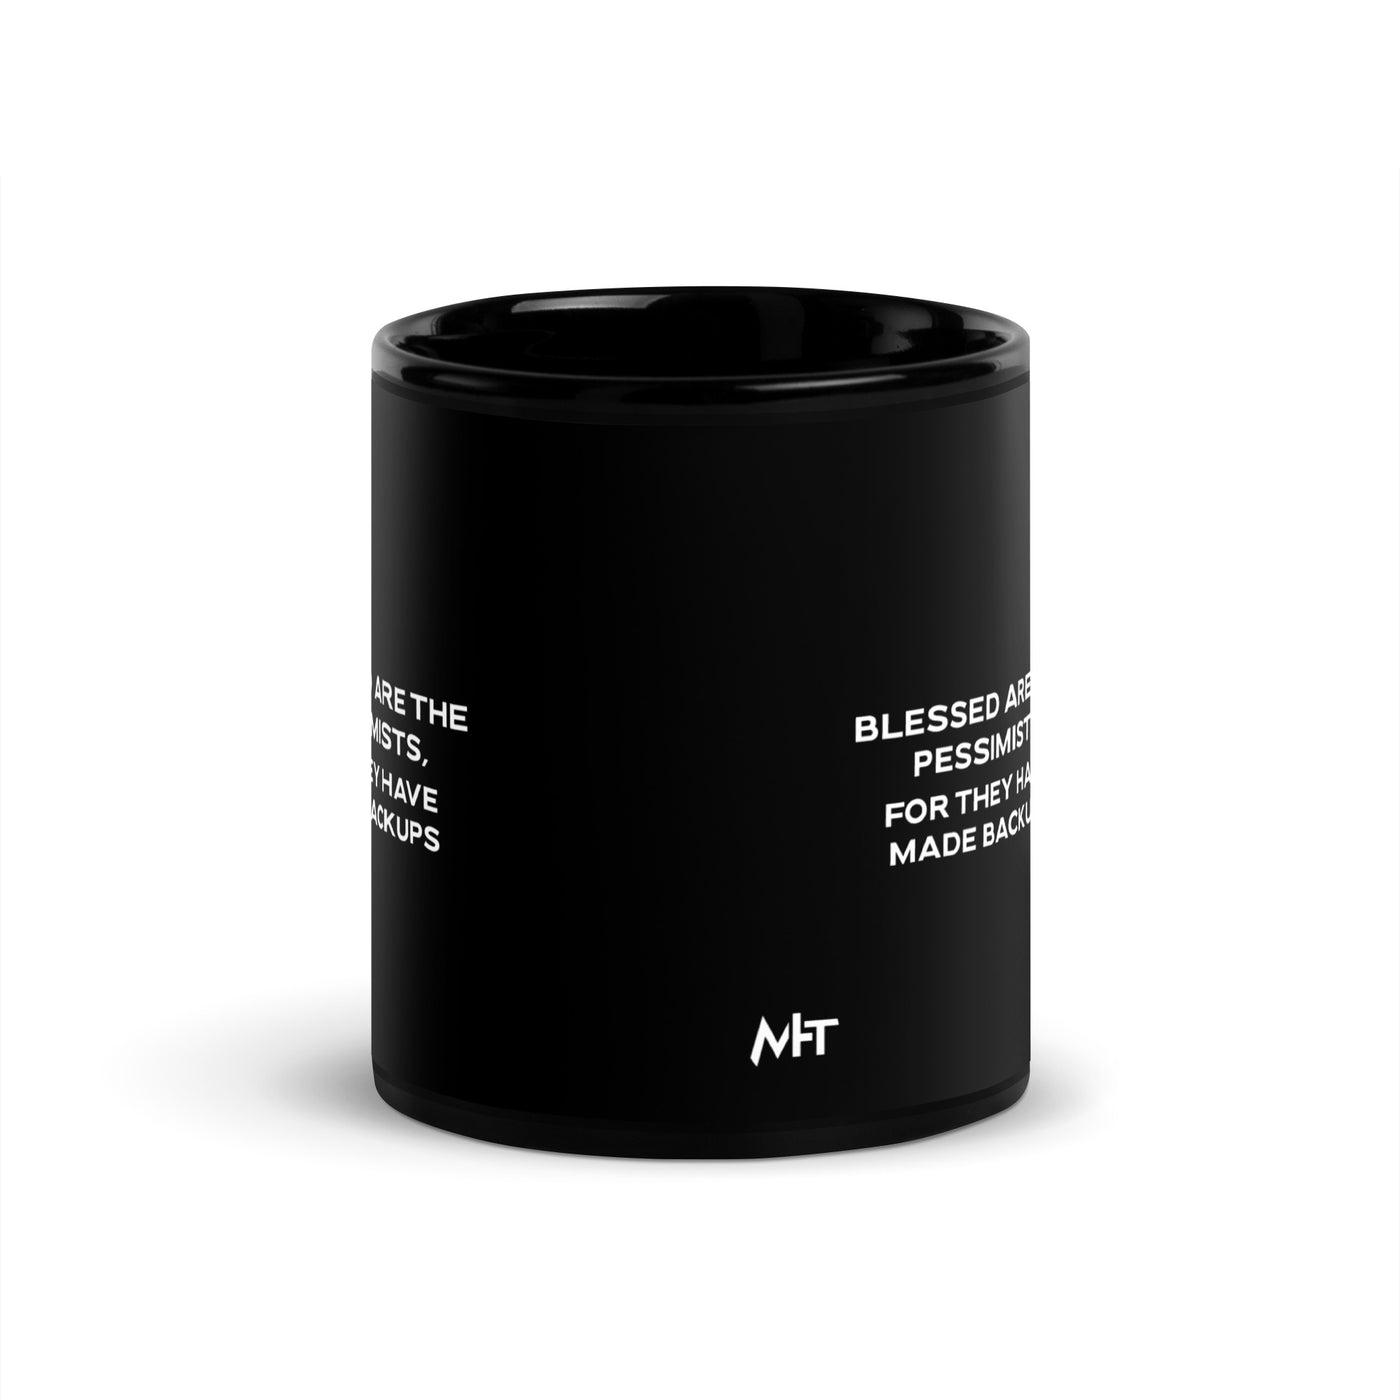 Blessed are the pessimists for they have made backups V2 - Black Glossy Mug